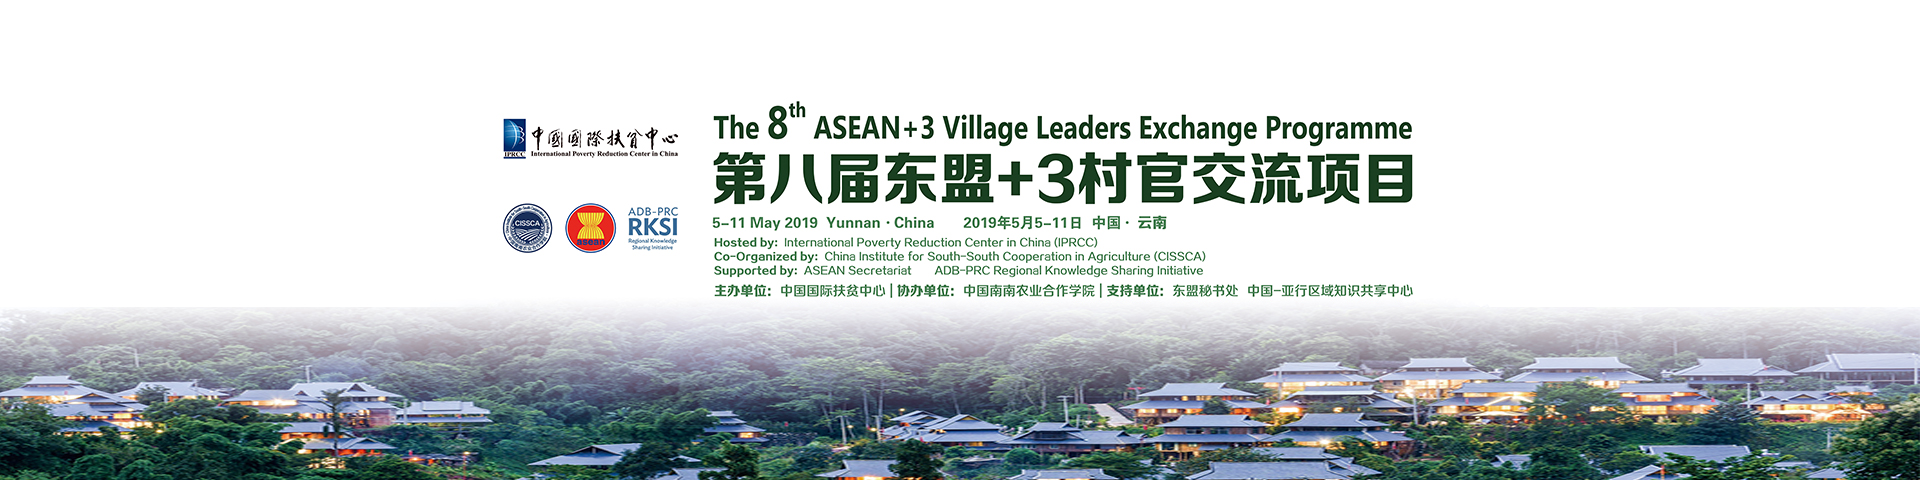 The 8<sup>th</sup> ASEAN+3 Village Leaders Exchange Programme